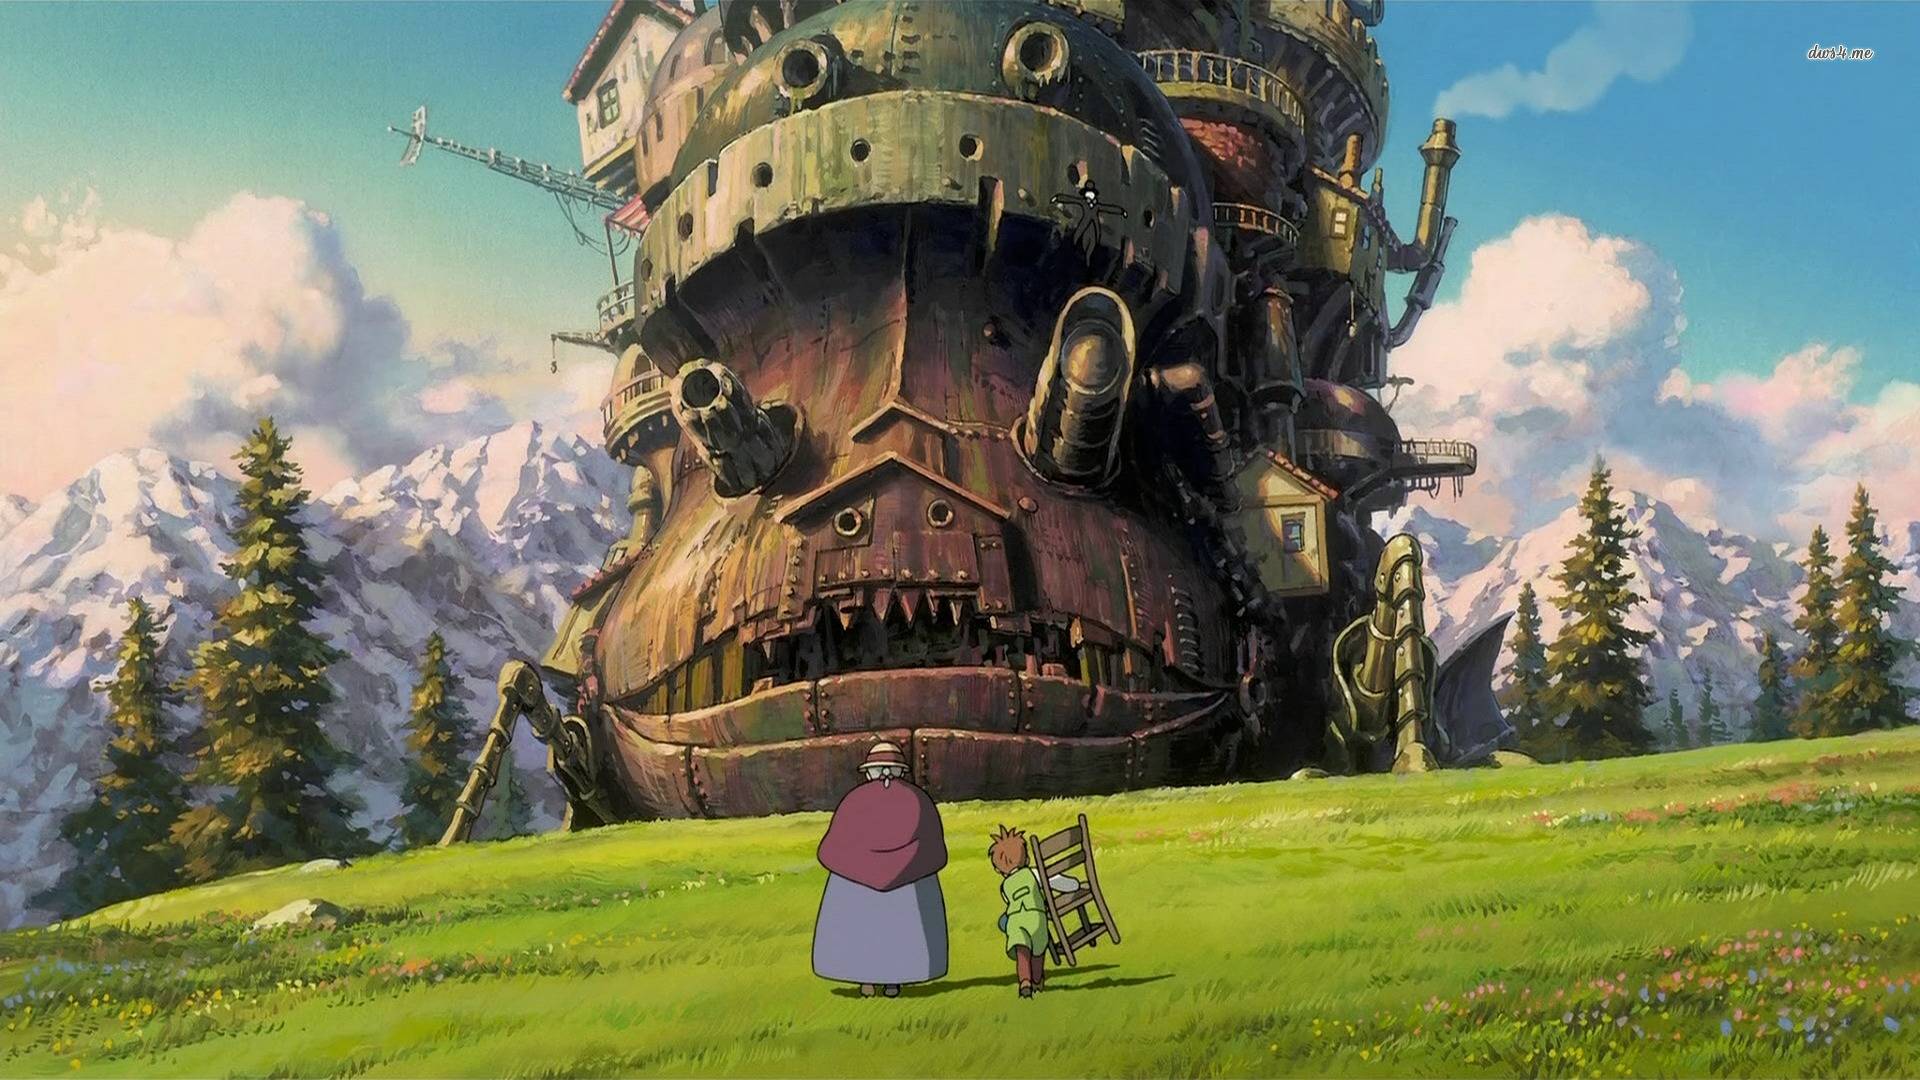 real life places that inspired Studio Ghibli movies